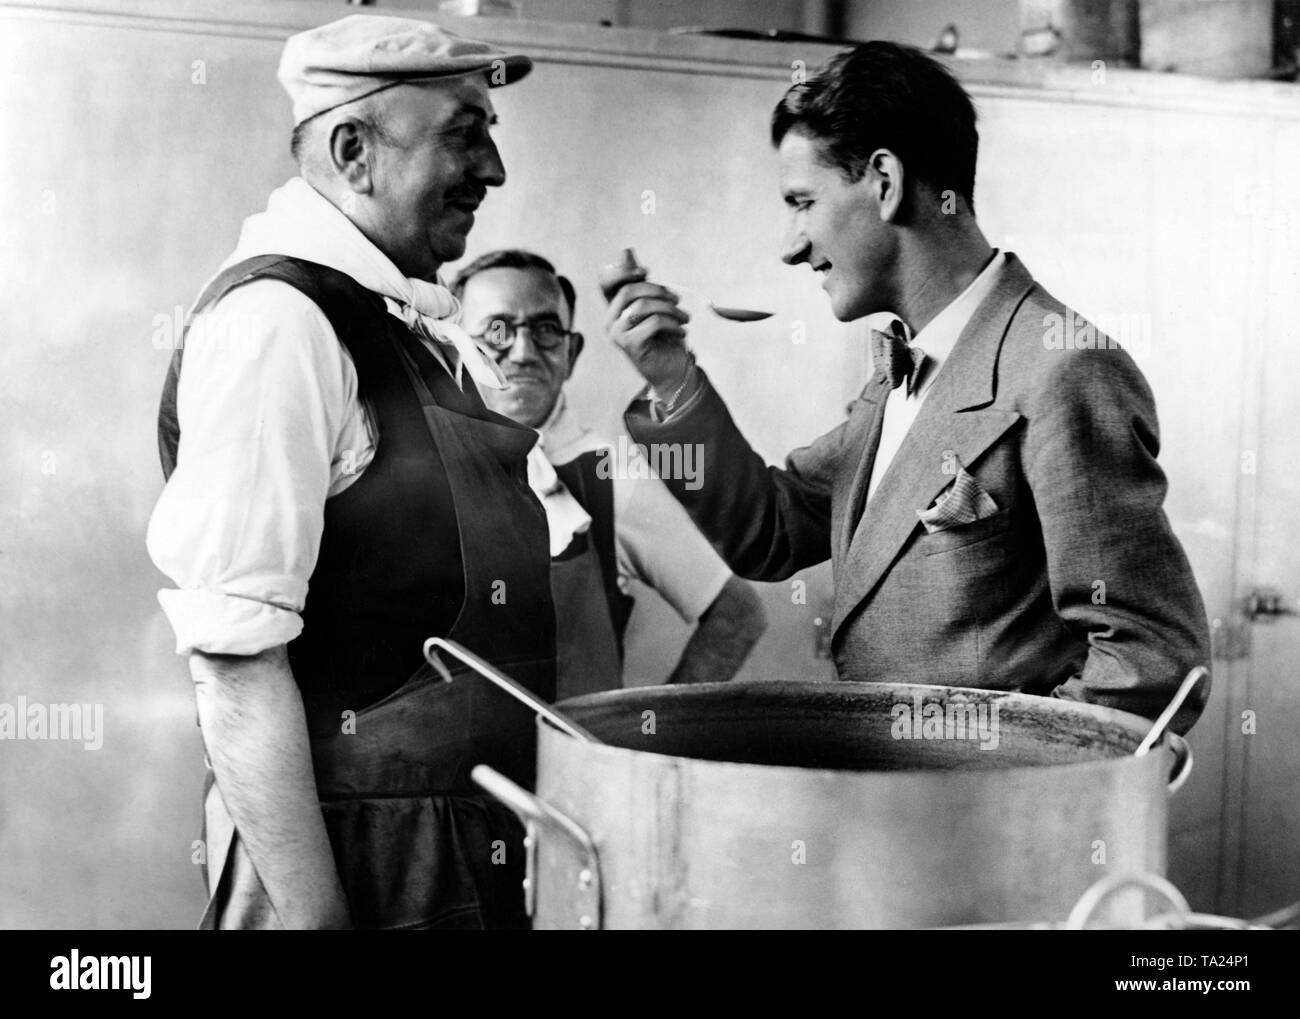 The Comite de la Jeunesse de France has set up an accommodation in Paris, which serves as a shelter for released young French prisoners of war. A young man eating. Stock Photo